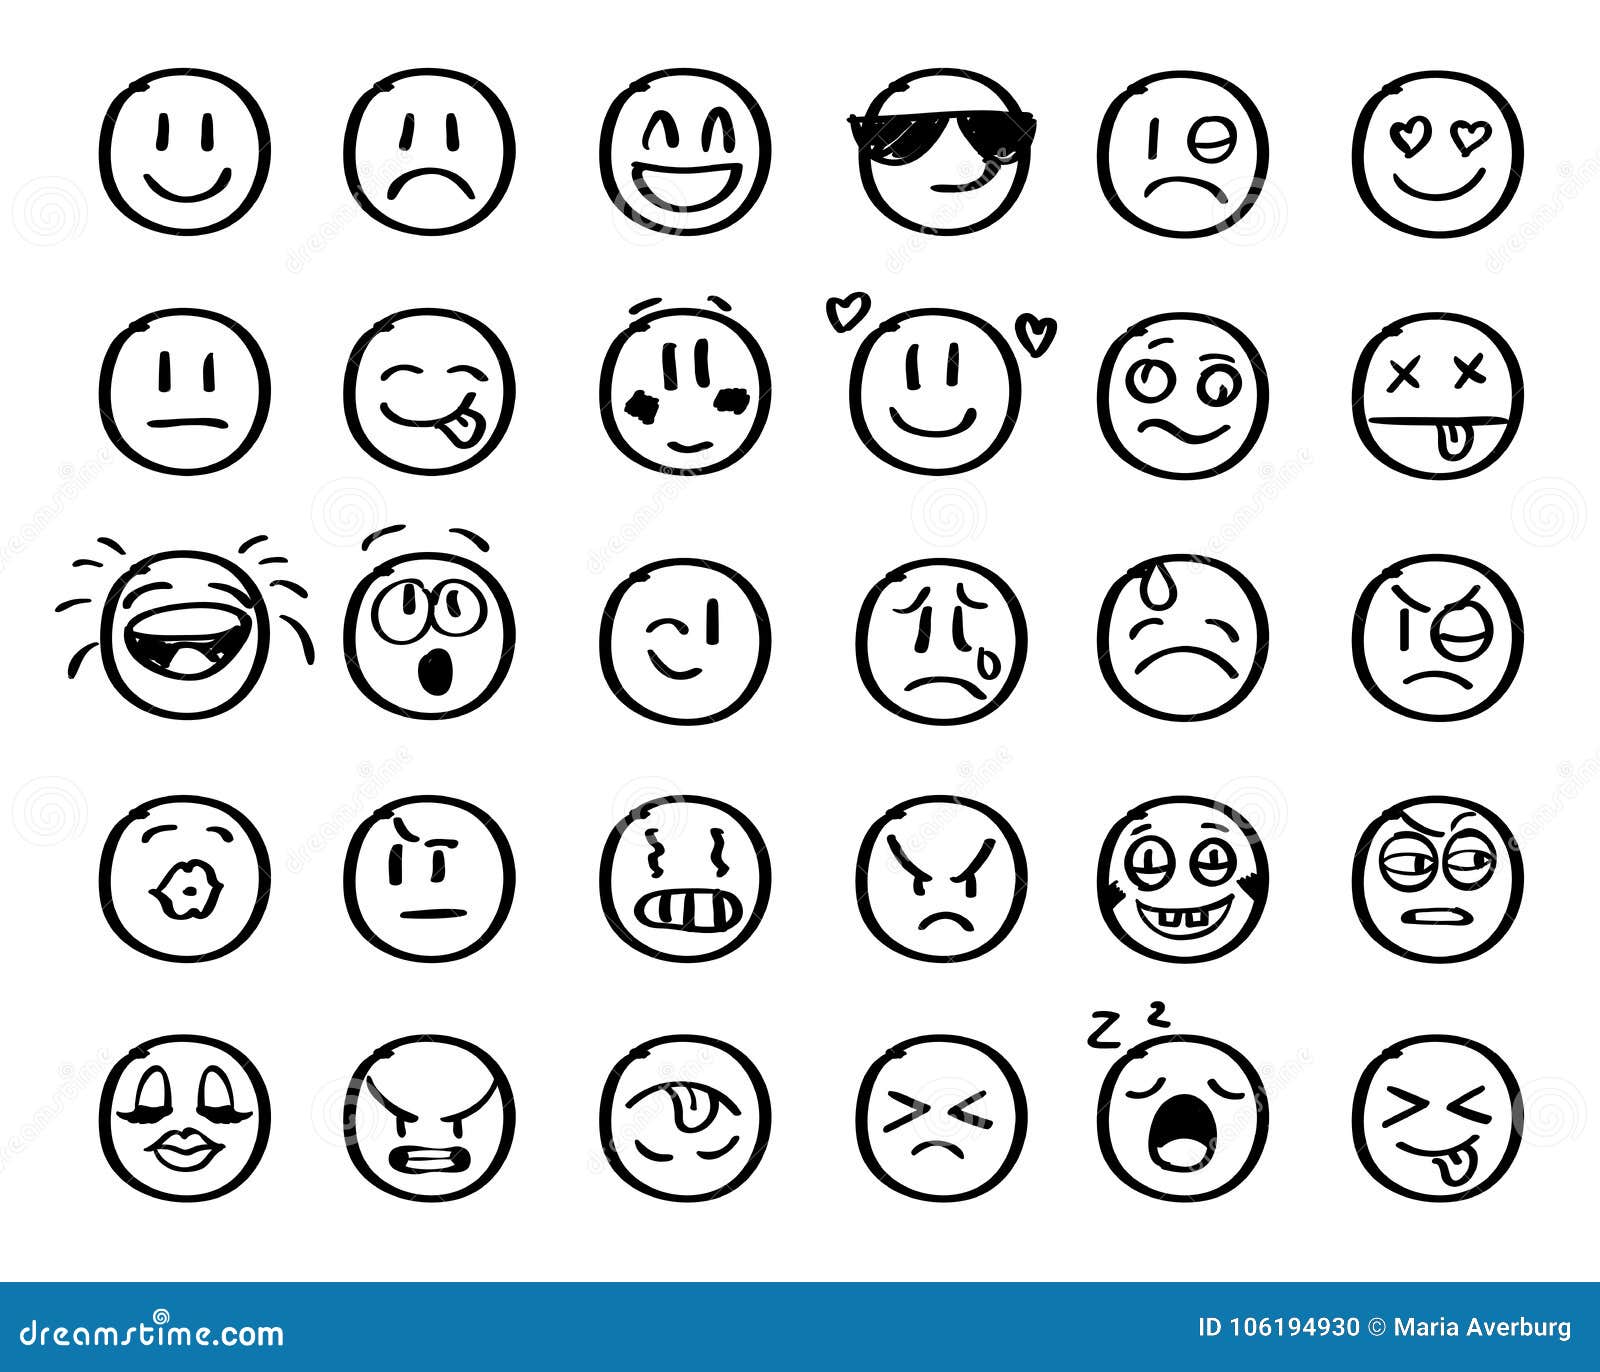 Modern Outline Style Emoji Icons Collection. Premium Quality Symbols ...